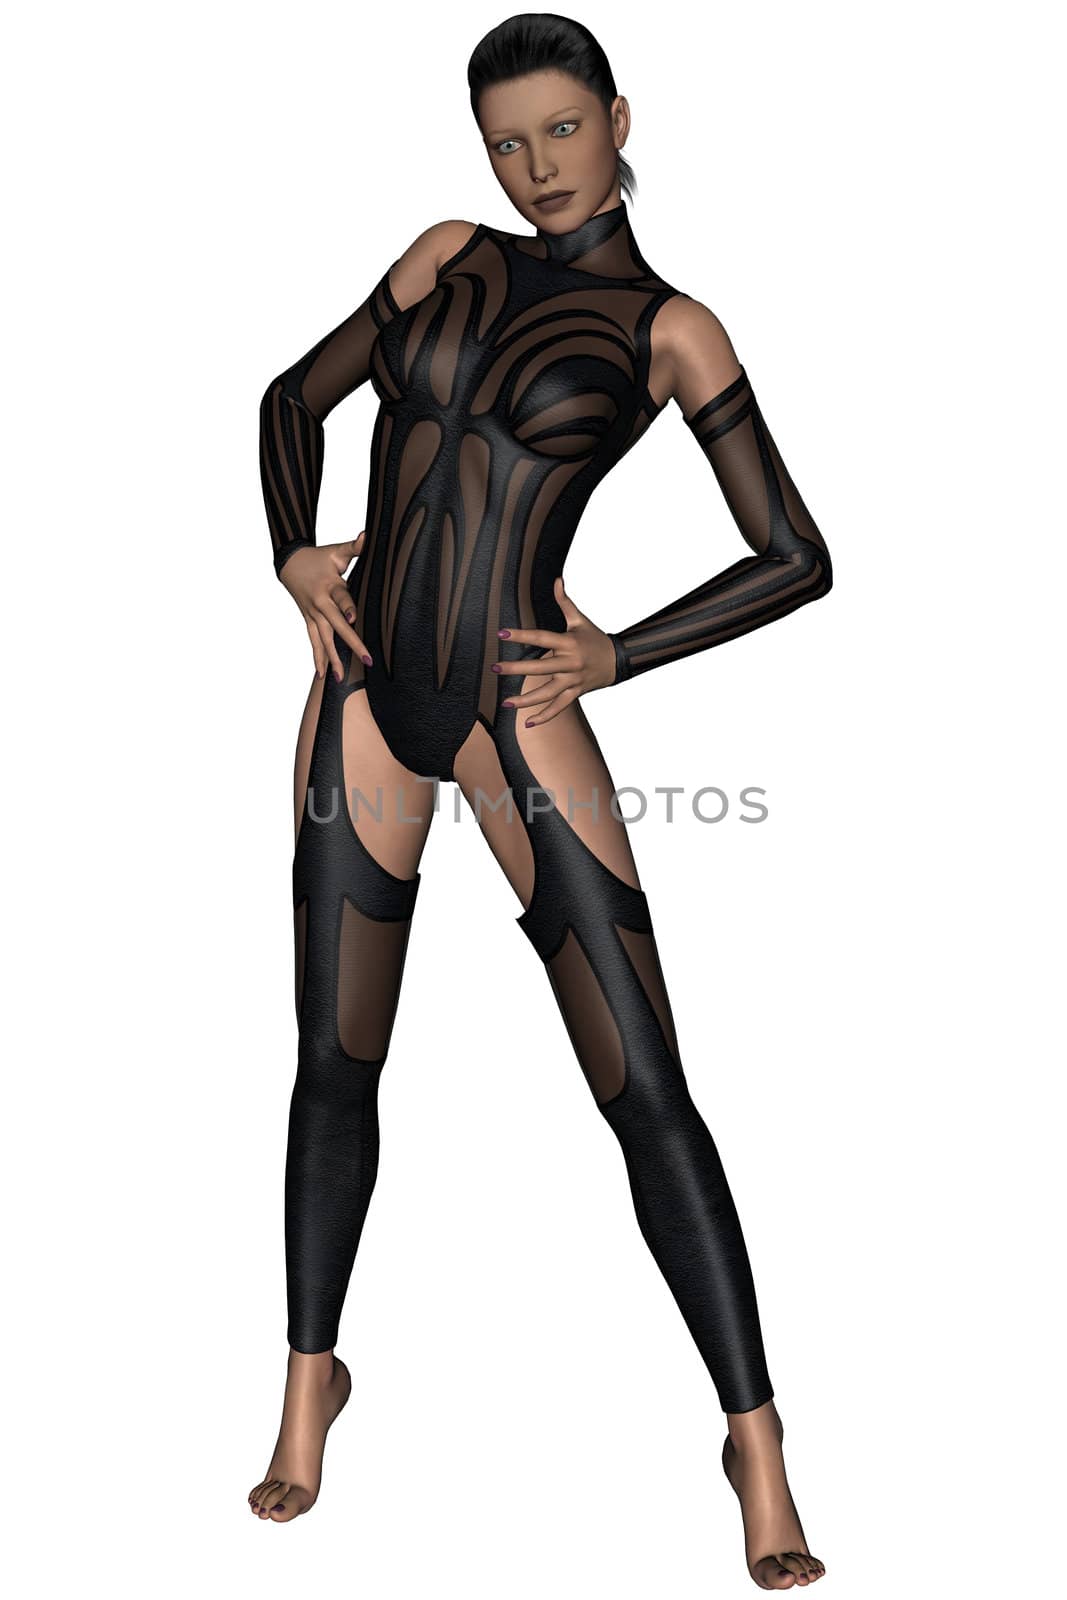 Pretty woman in bodysuit rendered on white background isolated